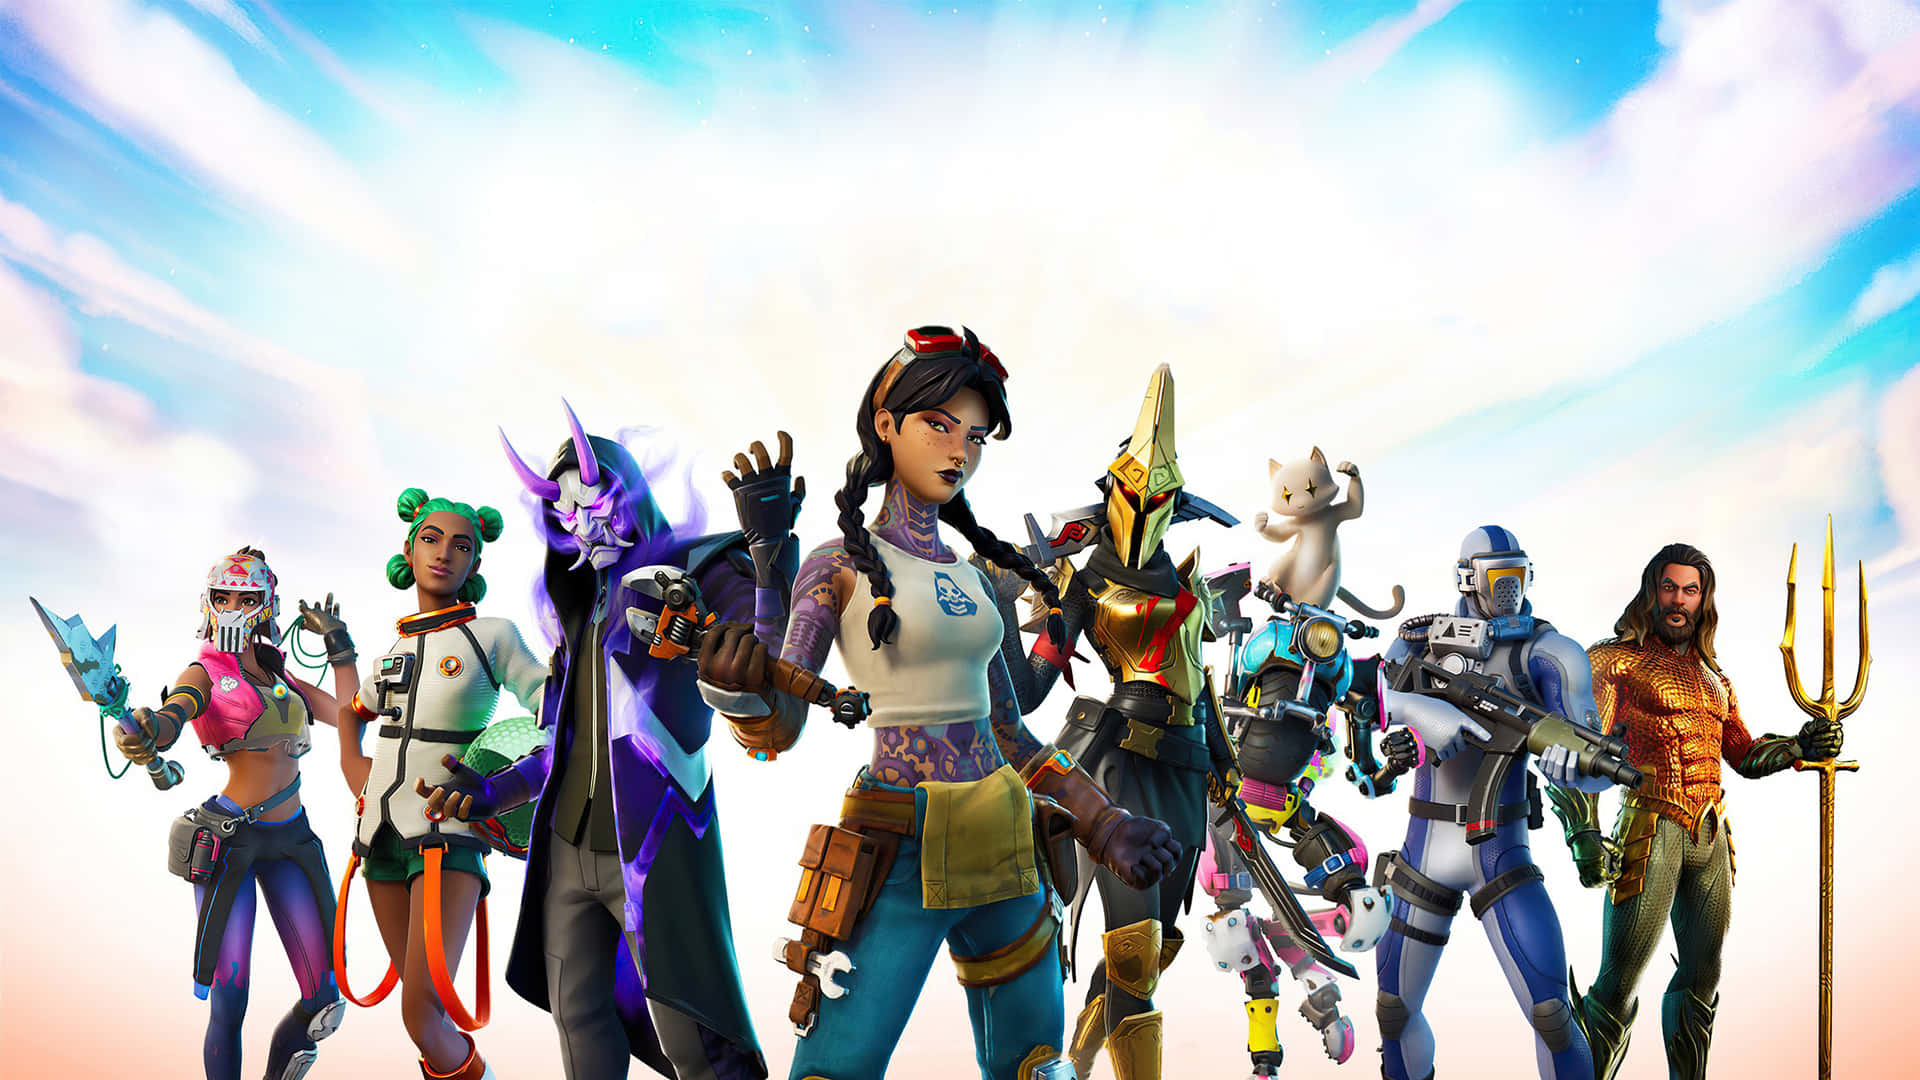 Fortnite Chapter2 Character Lineup Wallpaper